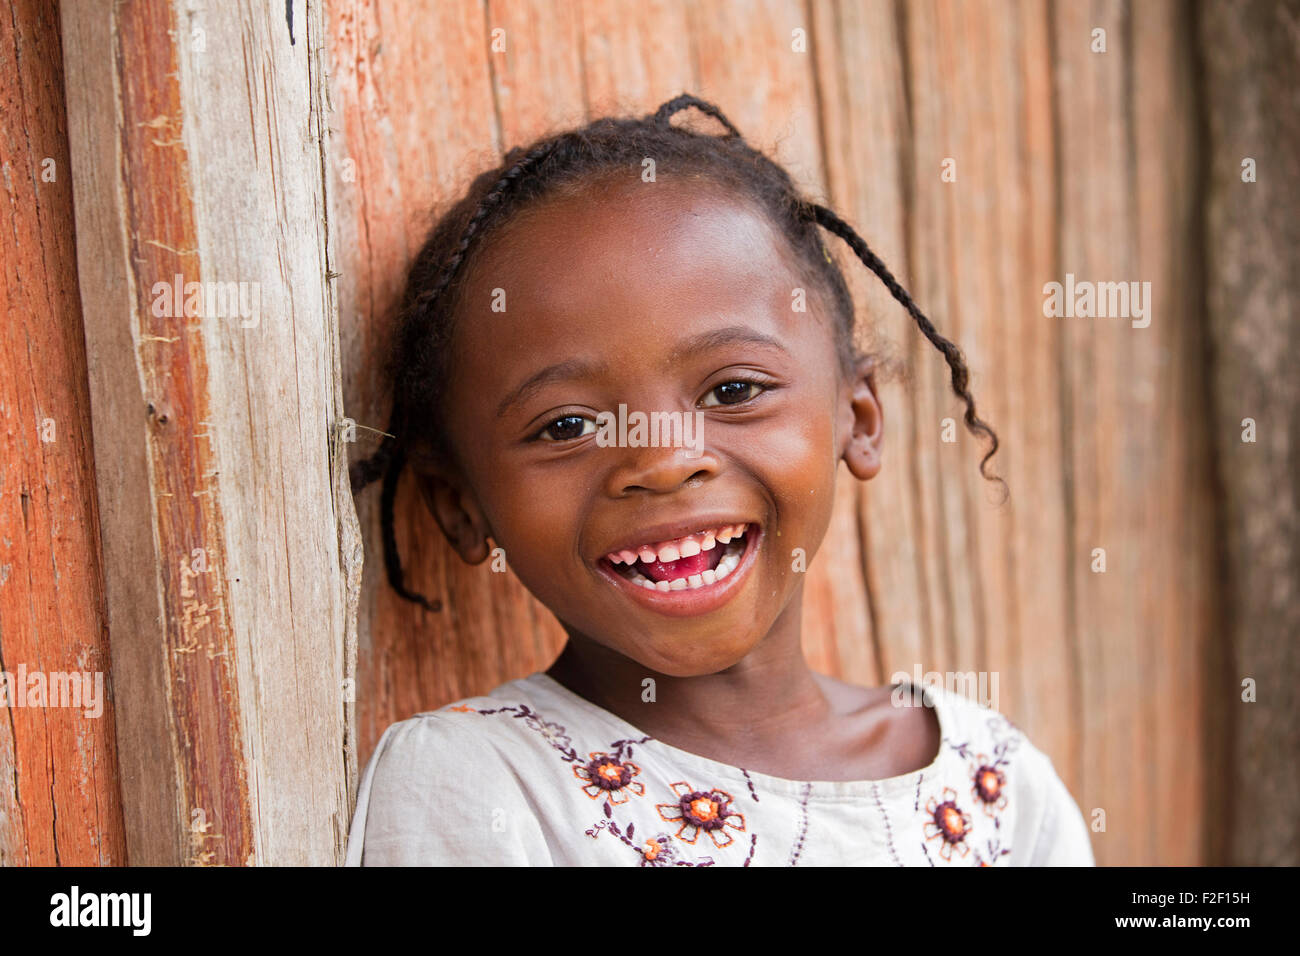 Close up portrait of smiling Malagasy little girl with braided hair, Vatovavy-Fitovinany, Madagascar, Southeast Africa Stock Photo